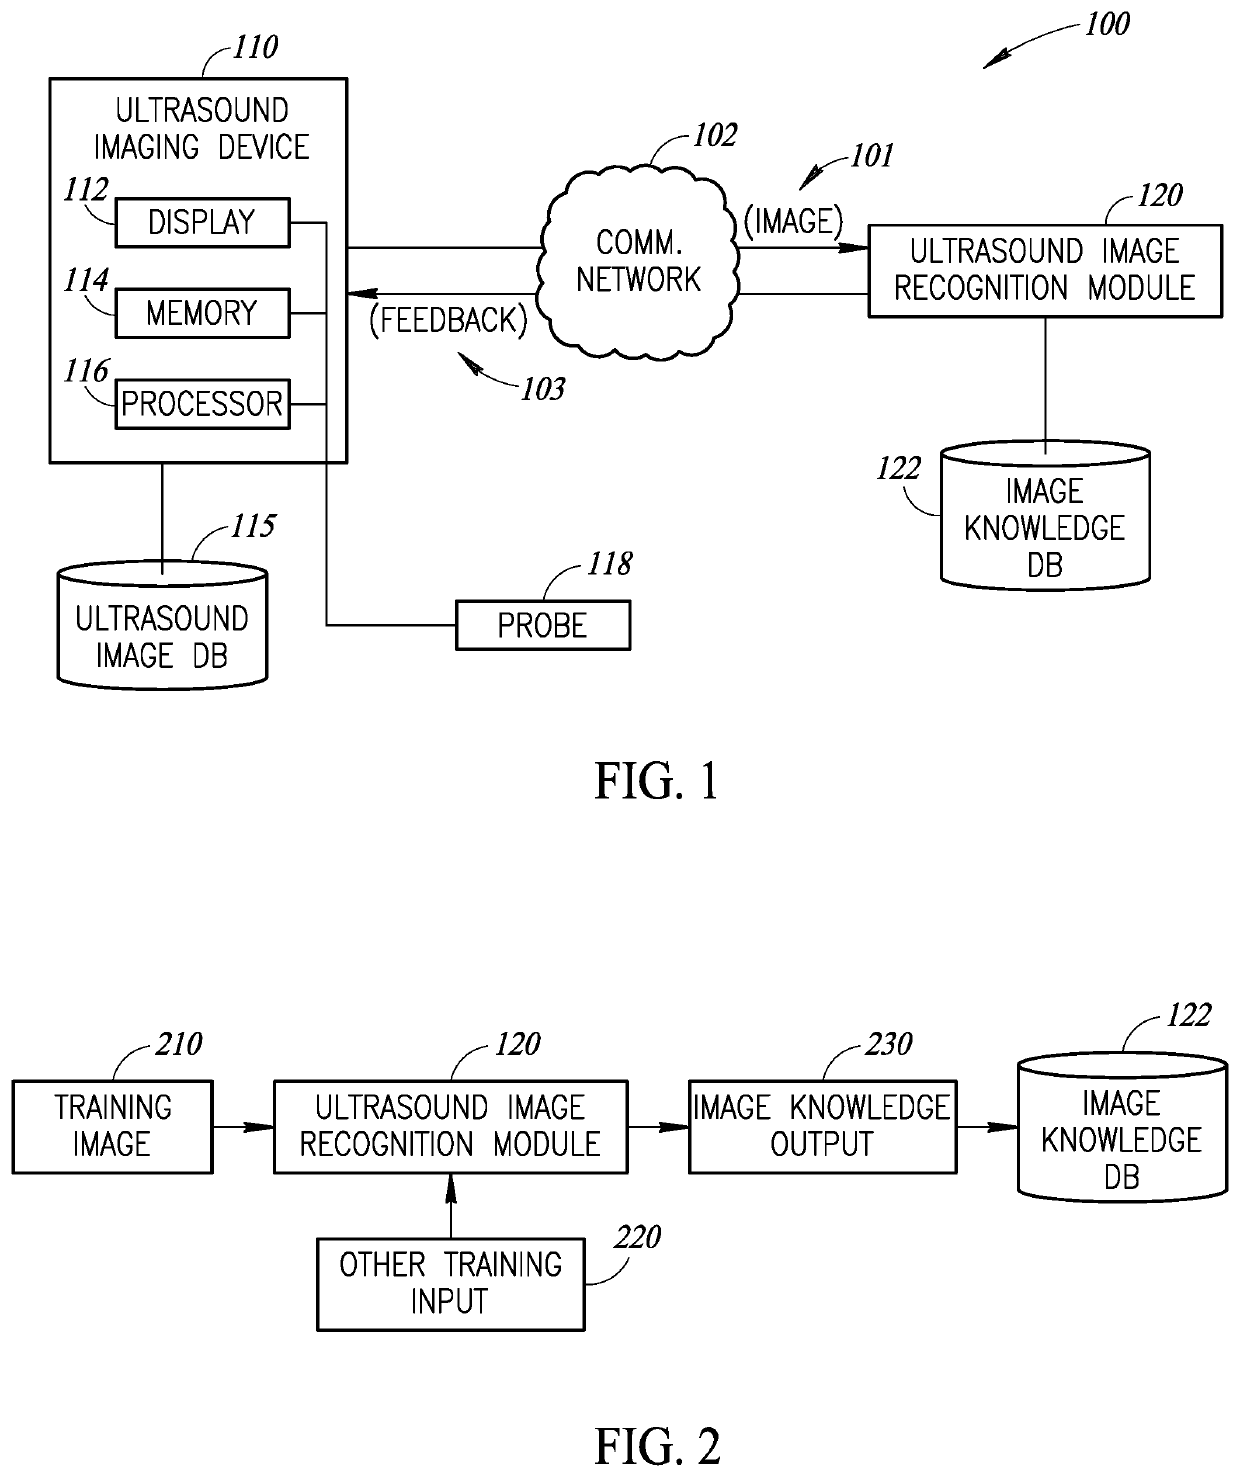 Ultrasound image recognition systems and methods utilizing an artificial intelligence network